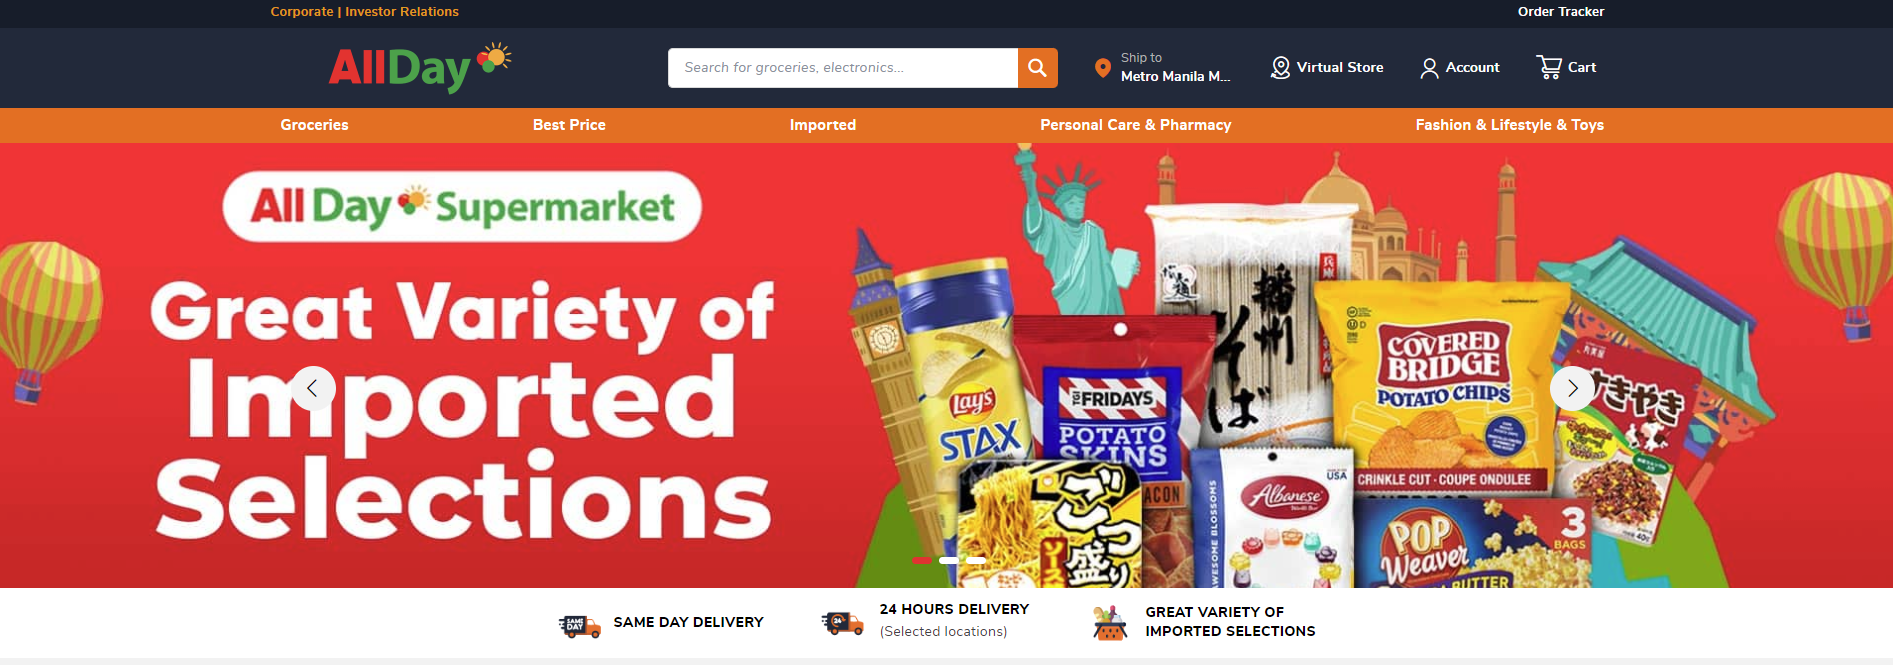 best online grocery delivery philippines - AllDay